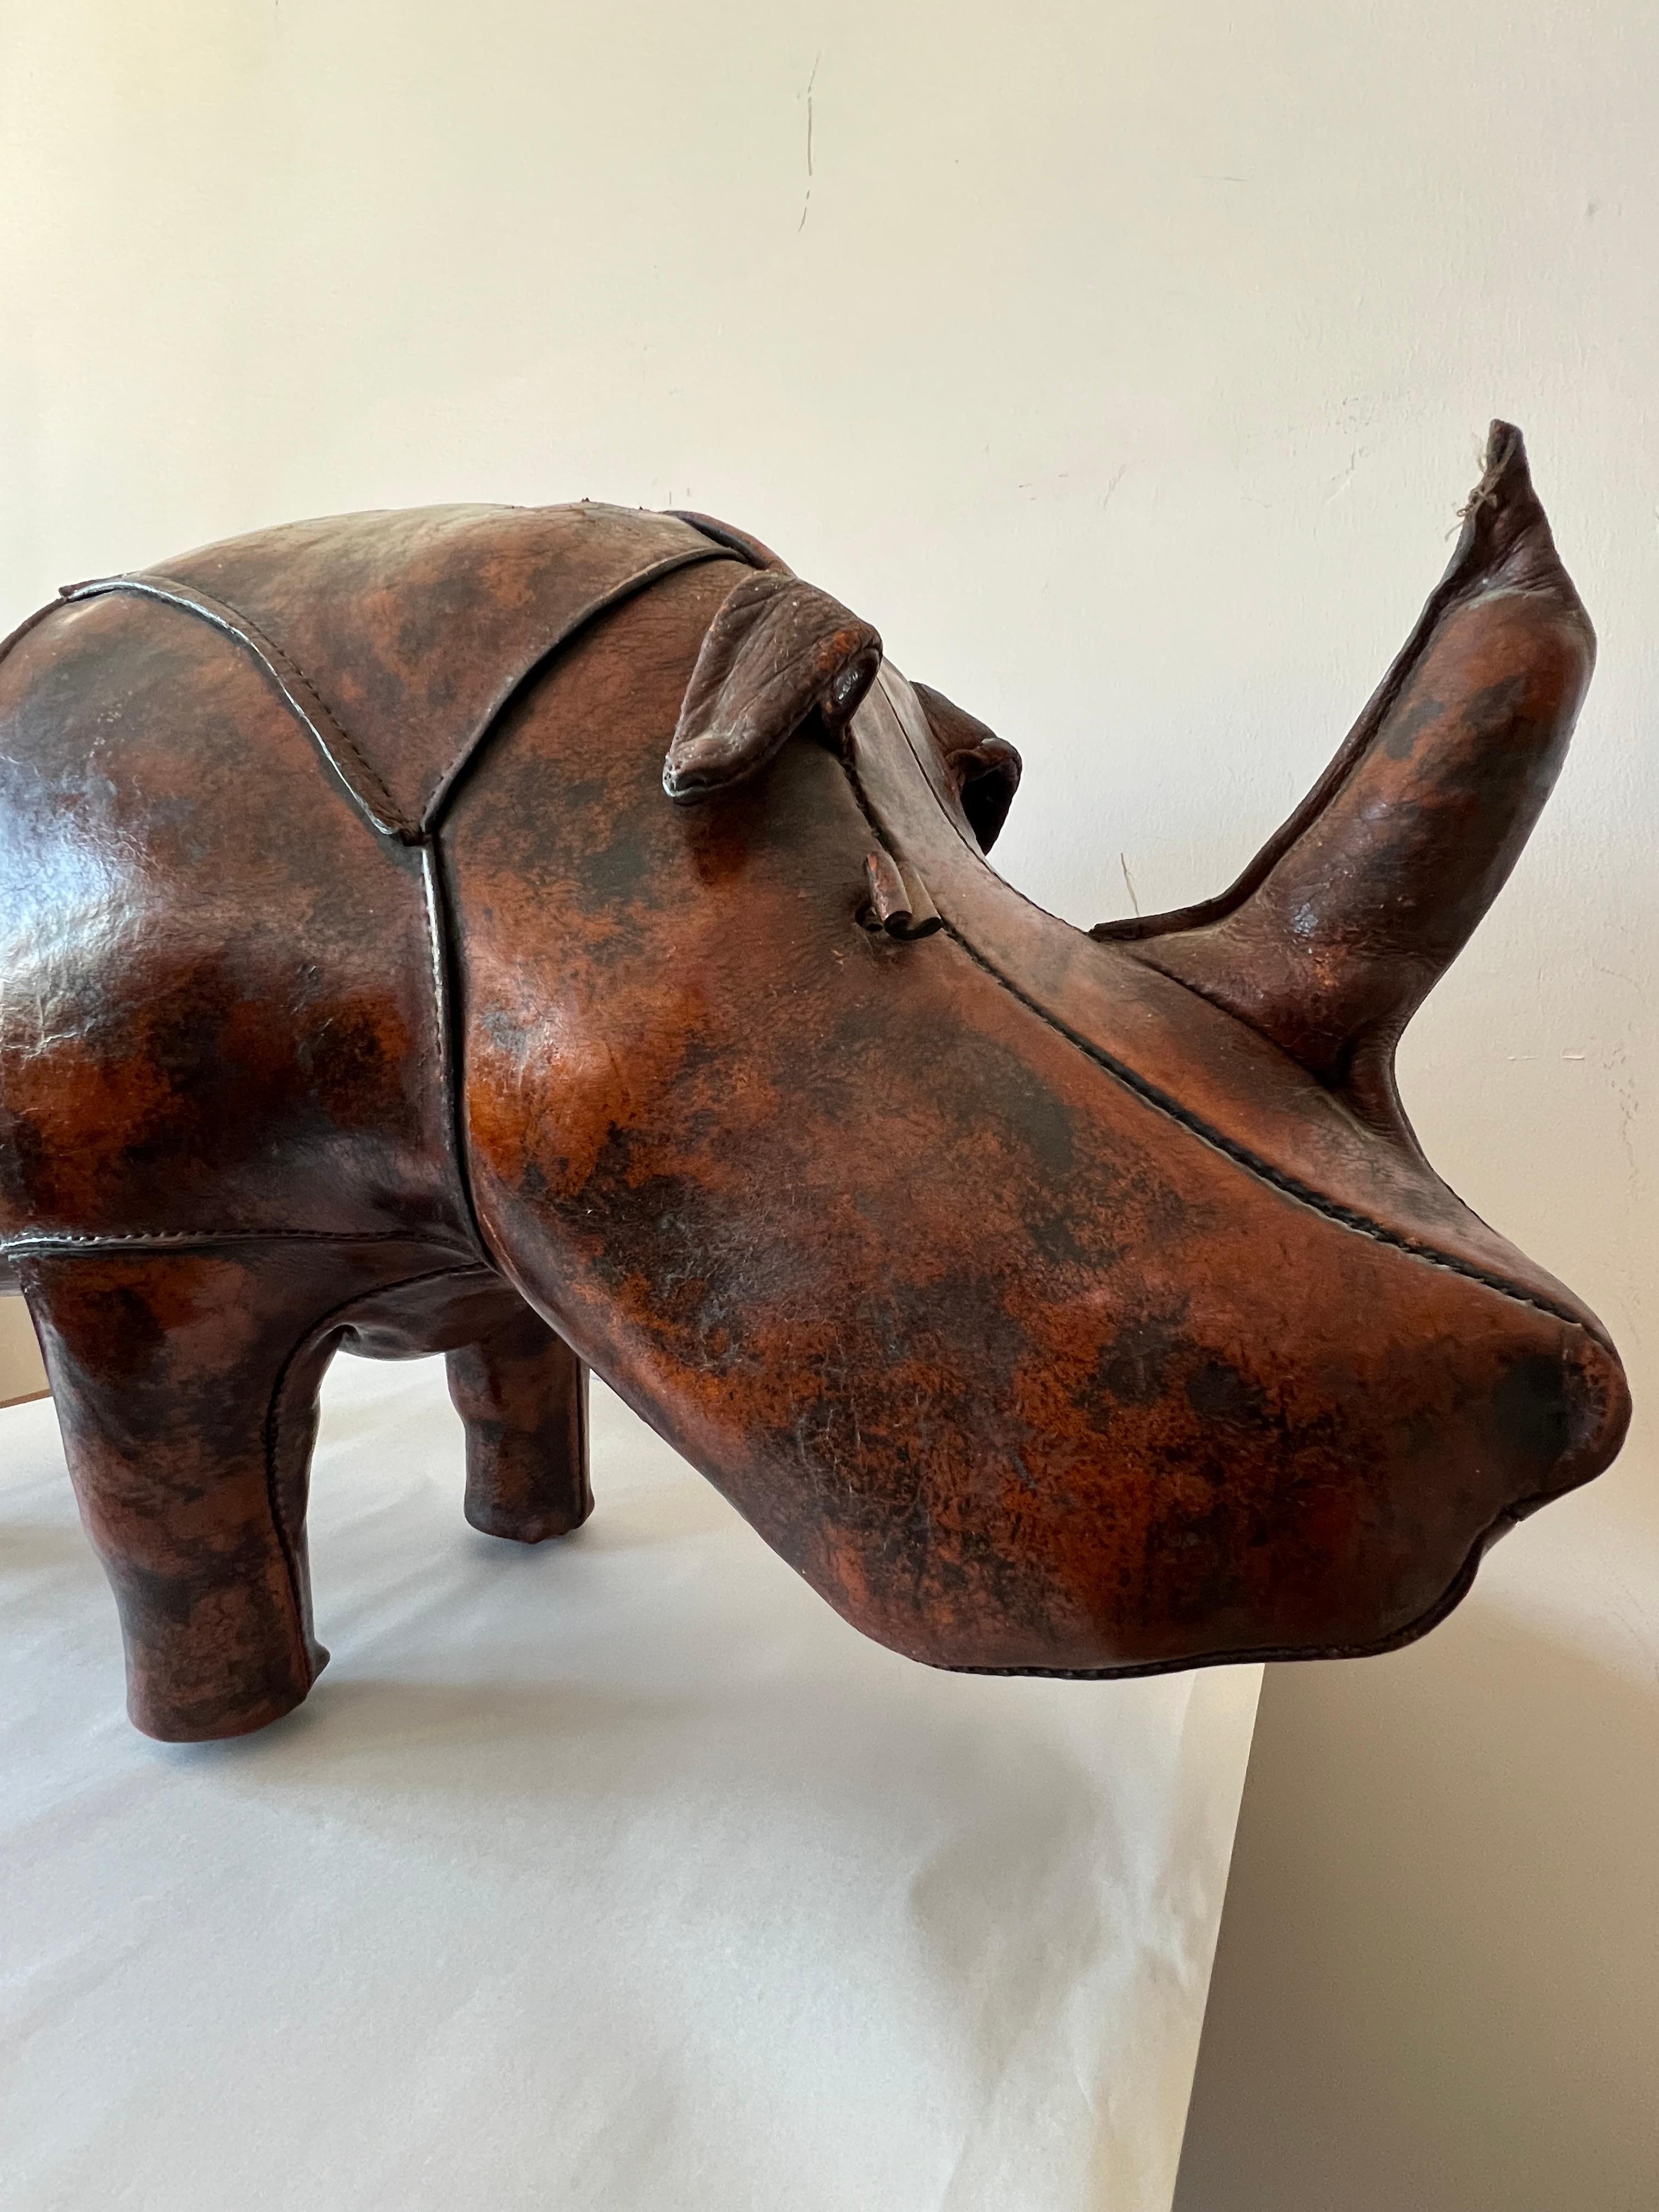 Vintage Leather Rhino Footstool by Abercrombie & Fitch, 1950s For Sale 8